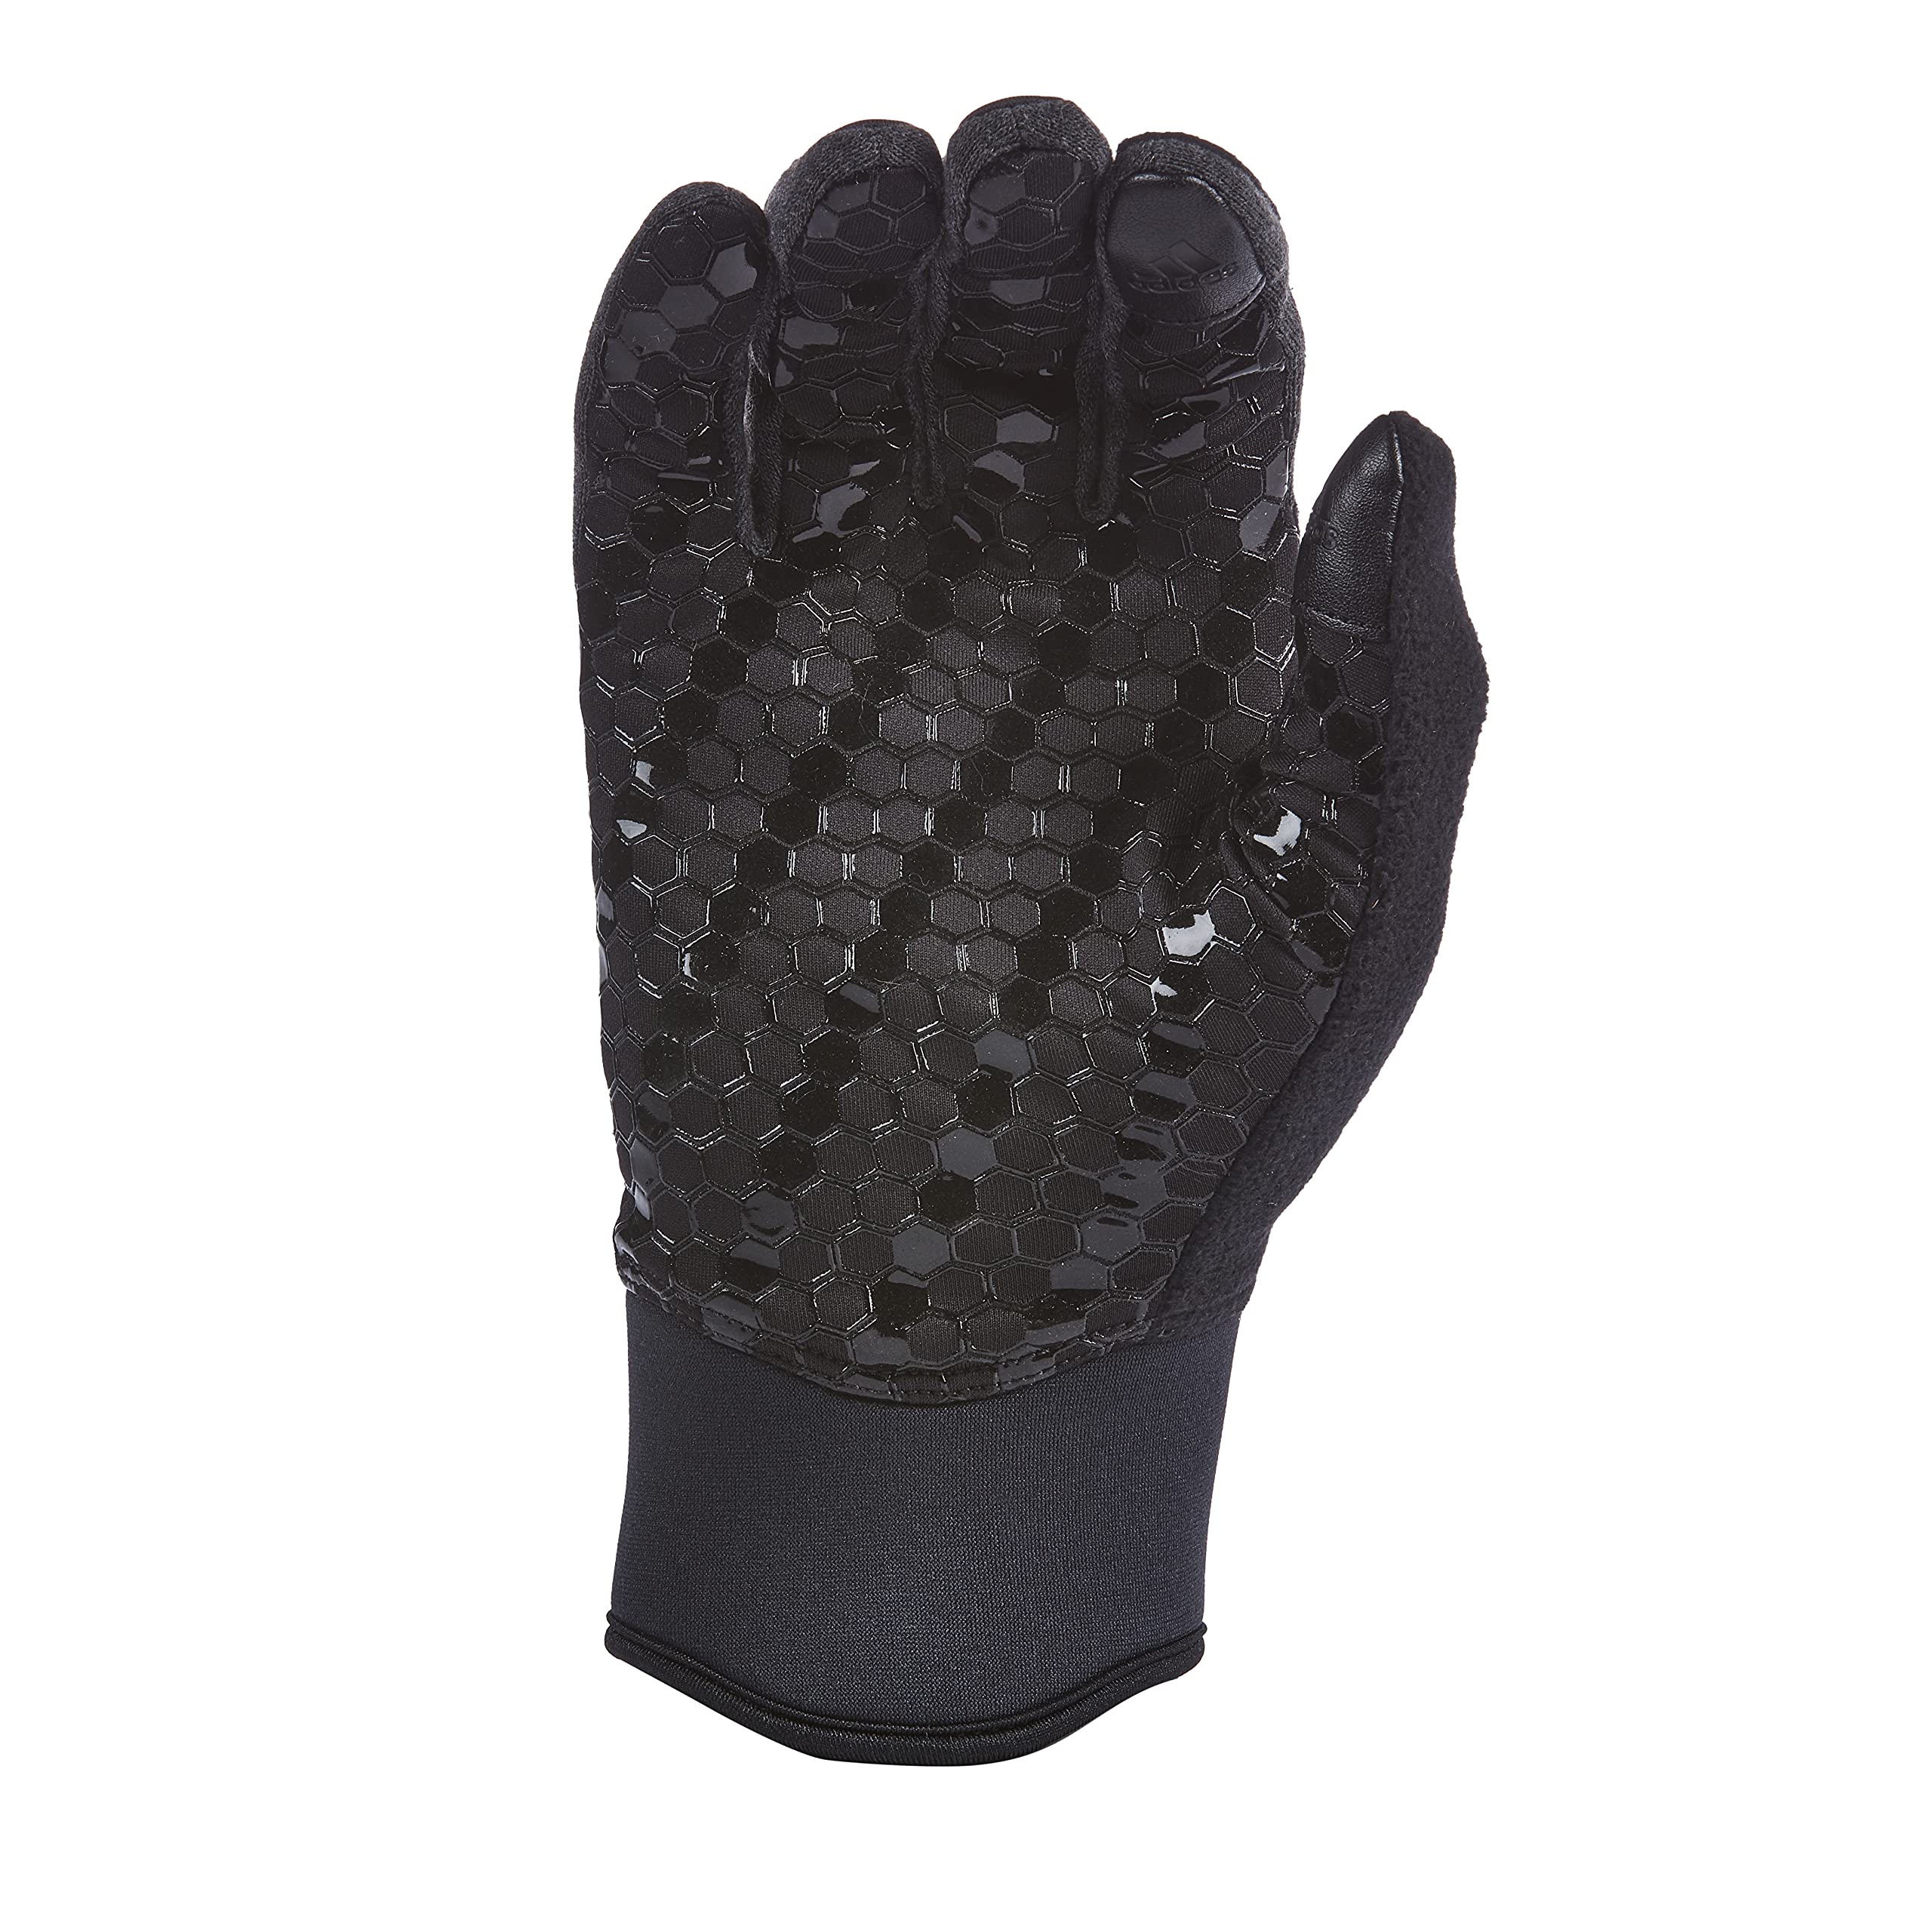 adidas Winter Performance Prime Glove with Honeycomb Matrix Palm for Grip and Touchscreen Conductivity Points - Multiple Styles